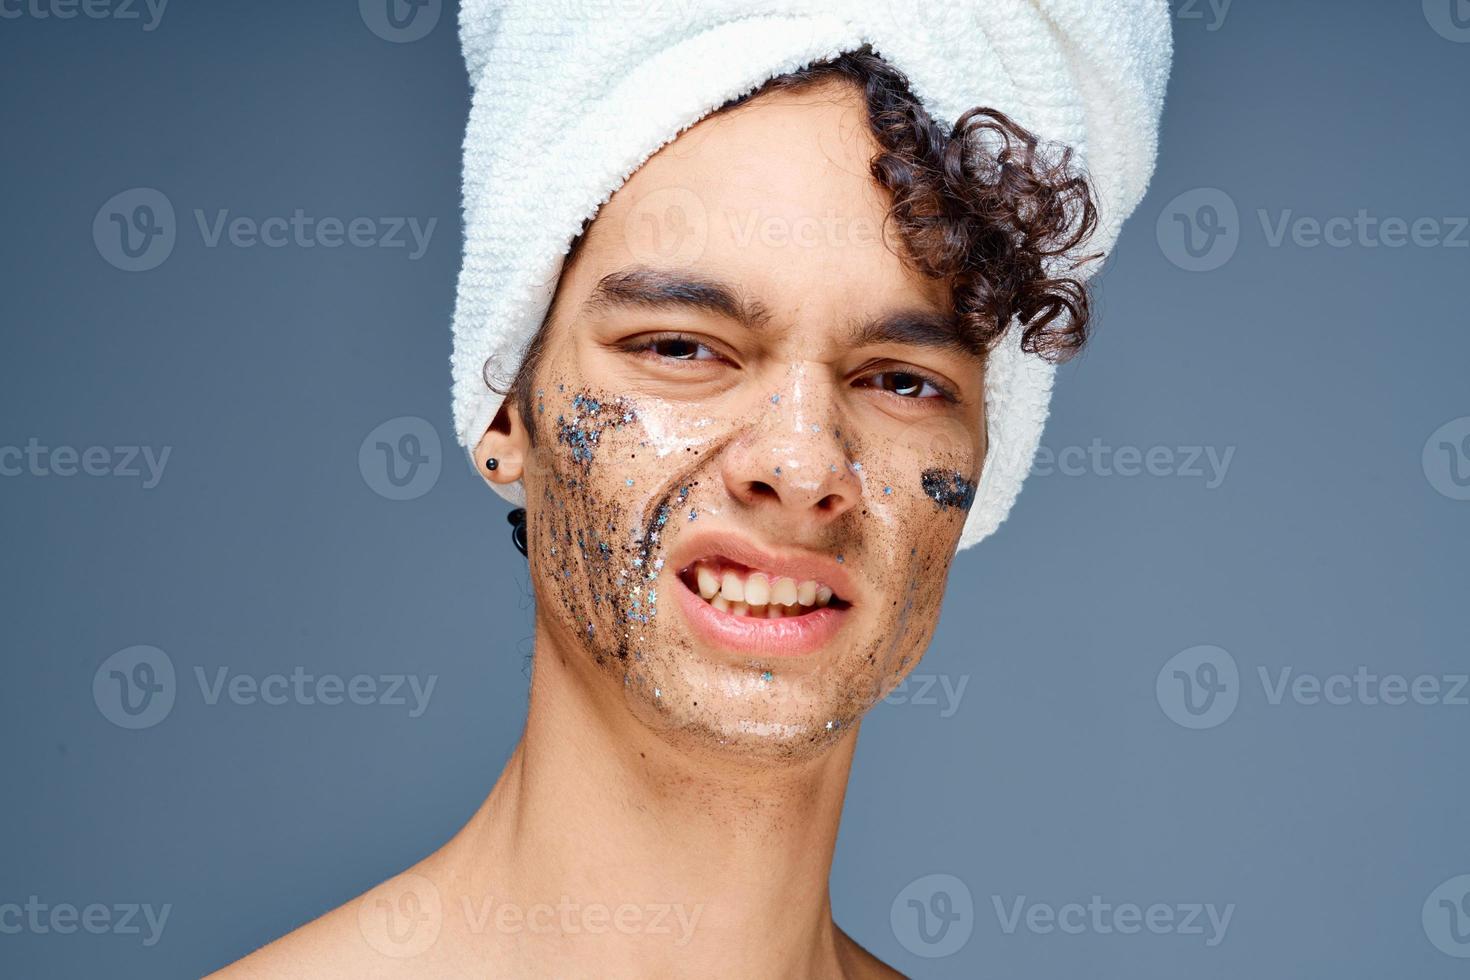 guy with a towel on his head cosmetics skin care close-up photo